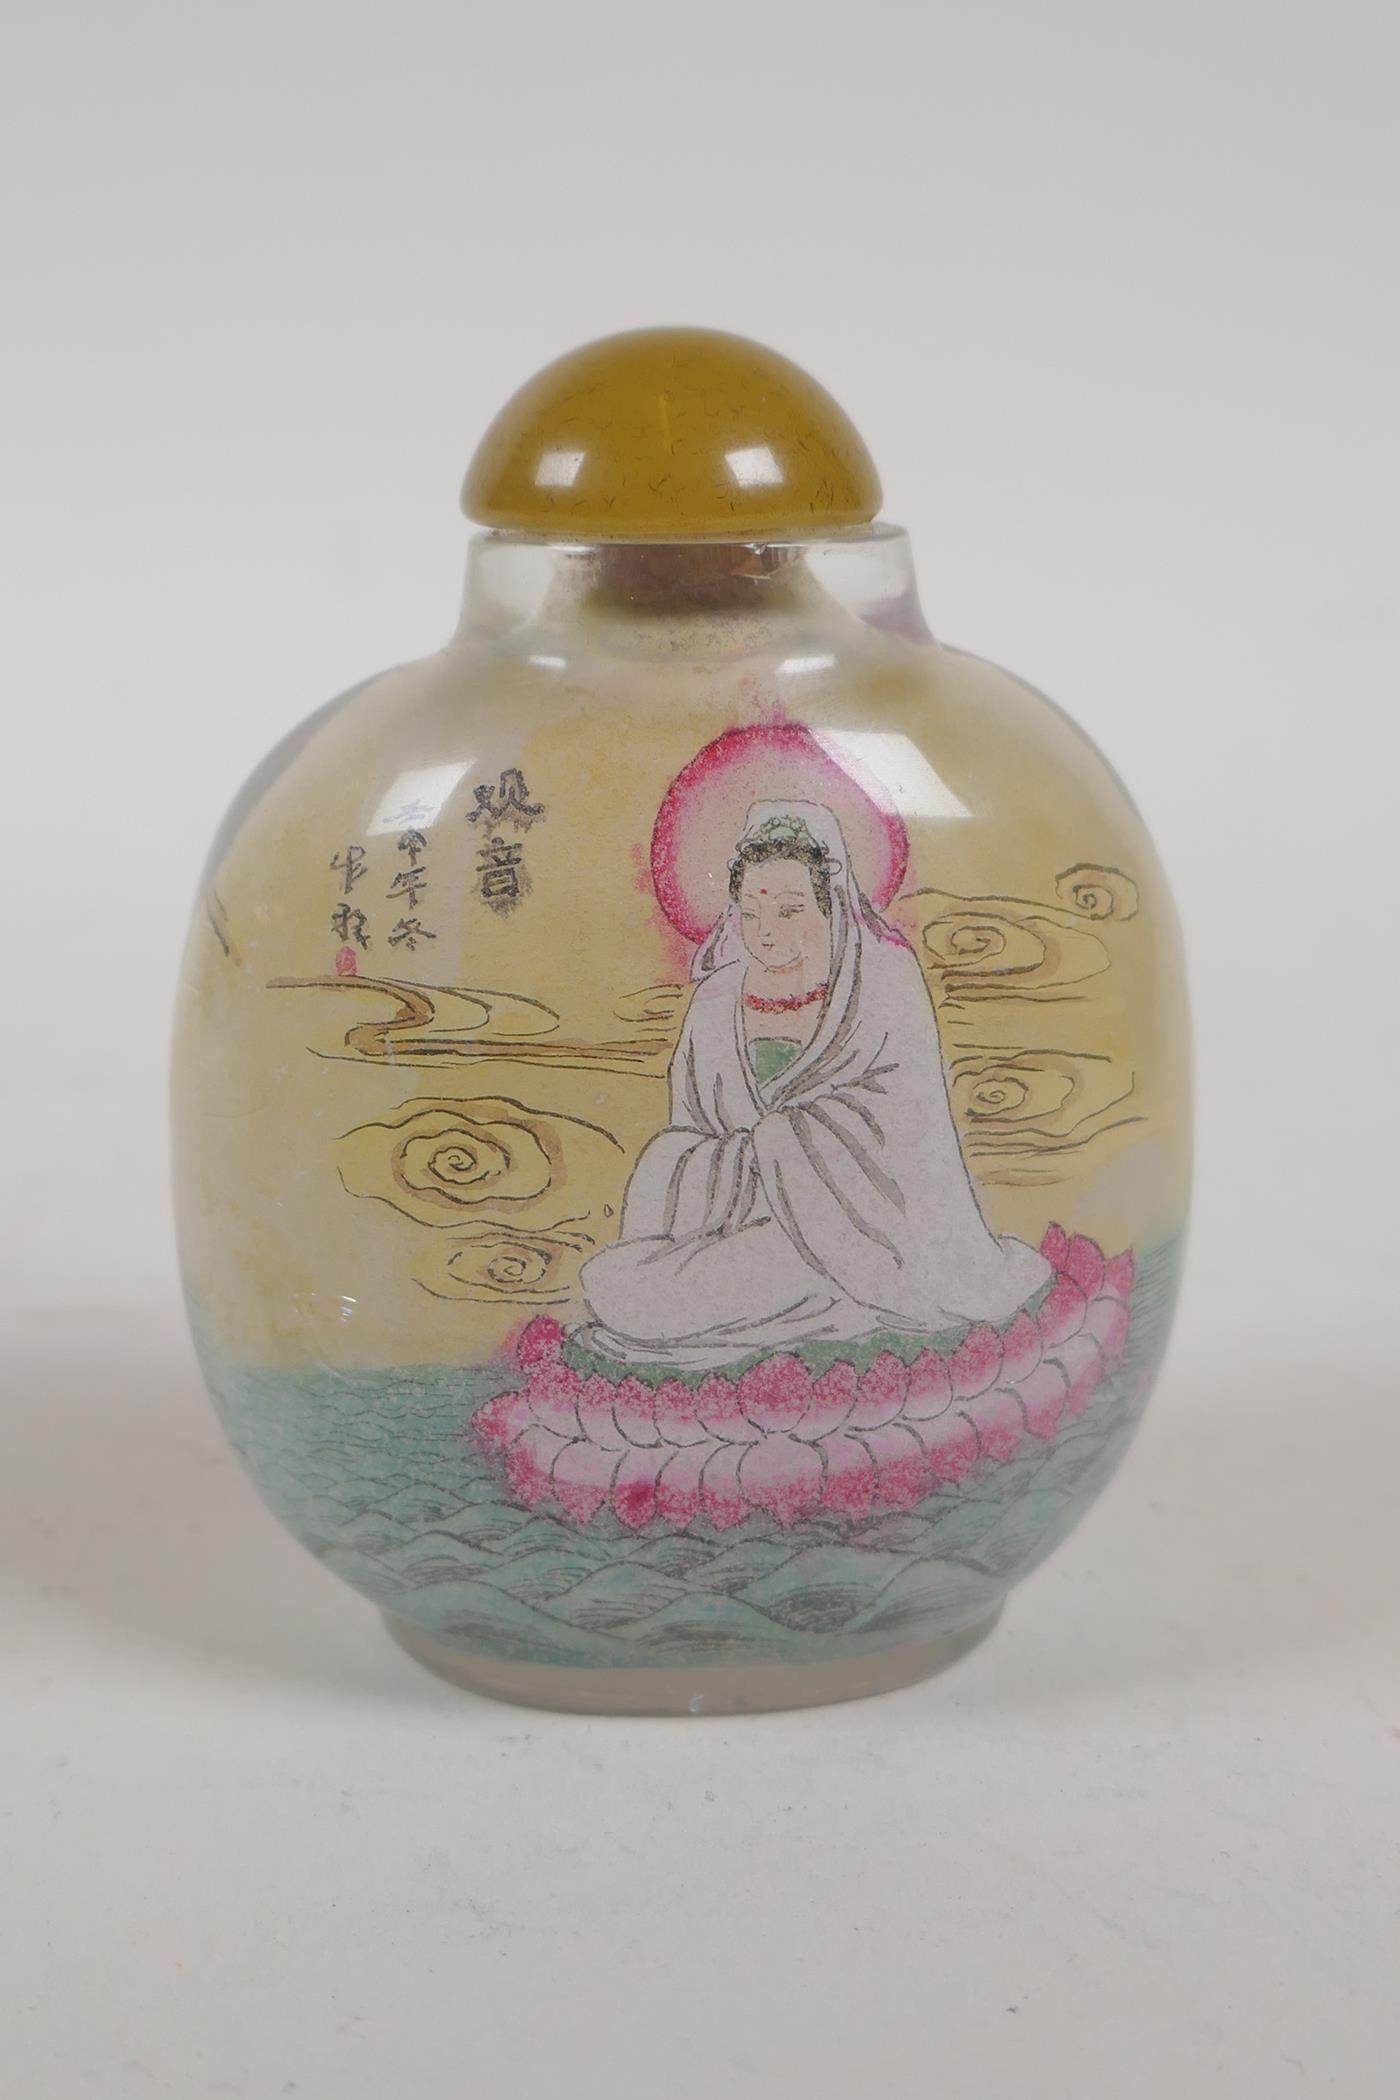 A Chinese reverse decorated glass snuff bottle depicting the great wall and a portrait of a noble, - Image 4 of 5